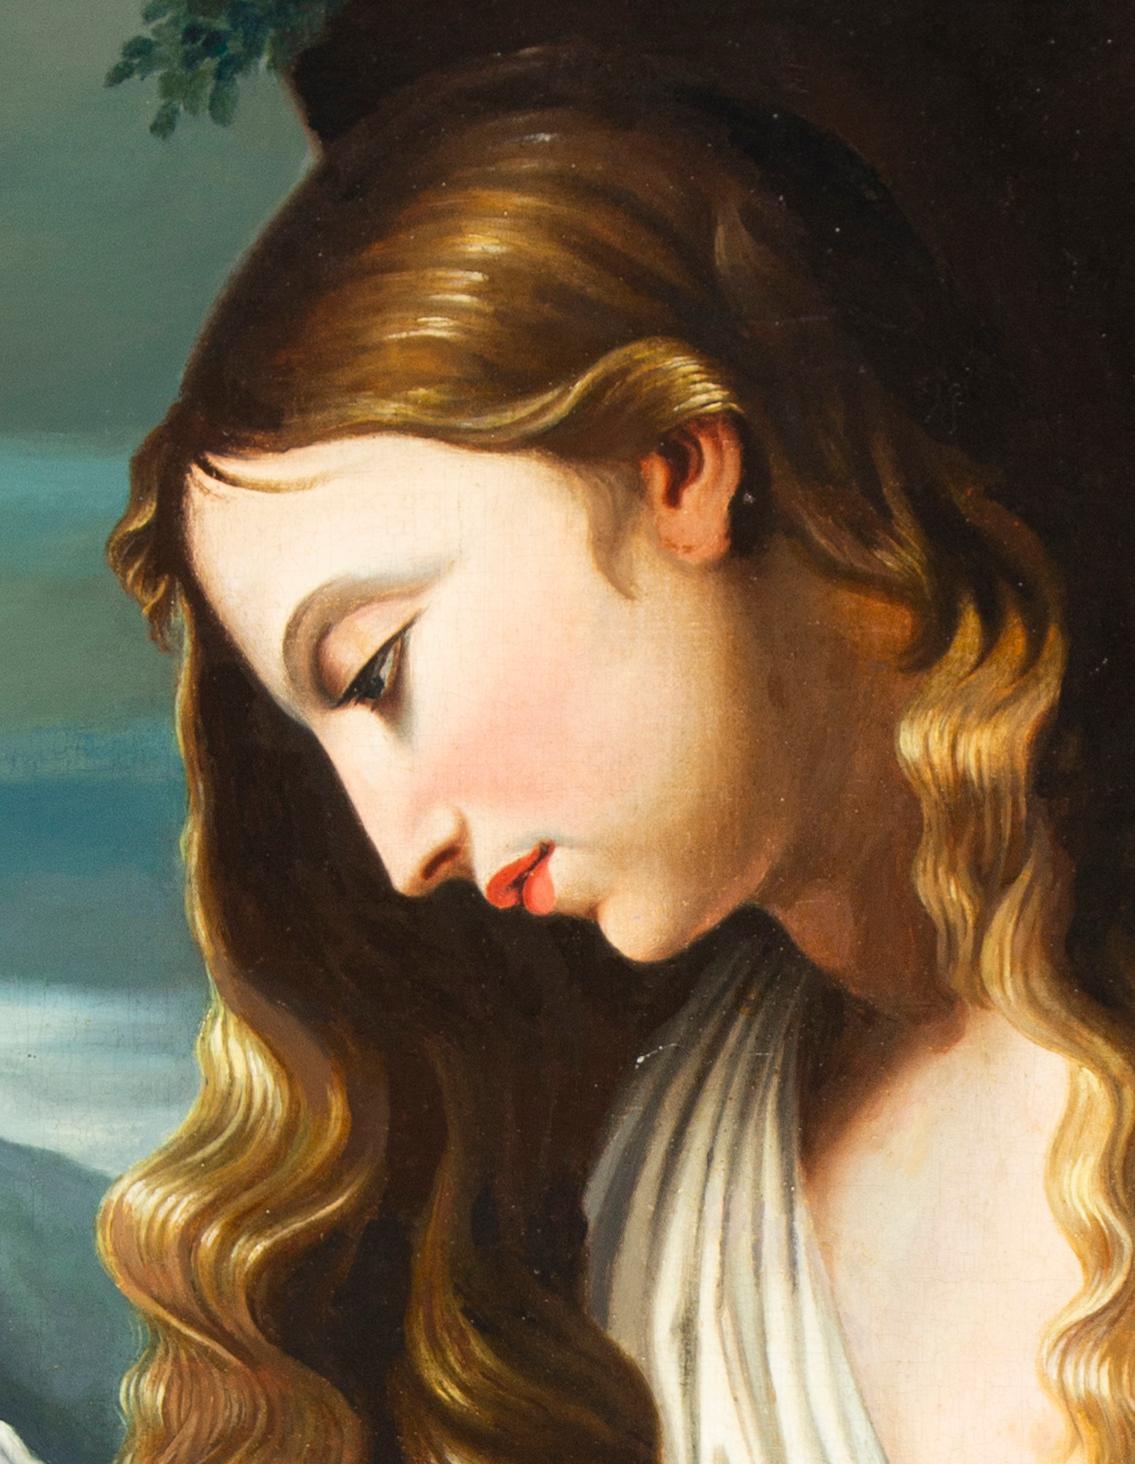 The painting shows Magdalene with a crucifix. The intimate composition raises the inner contemplation and penitence of the biblical figure to be the subject of the artwork.
The oil painting on re-mounted canvas in in good conition, but the frame